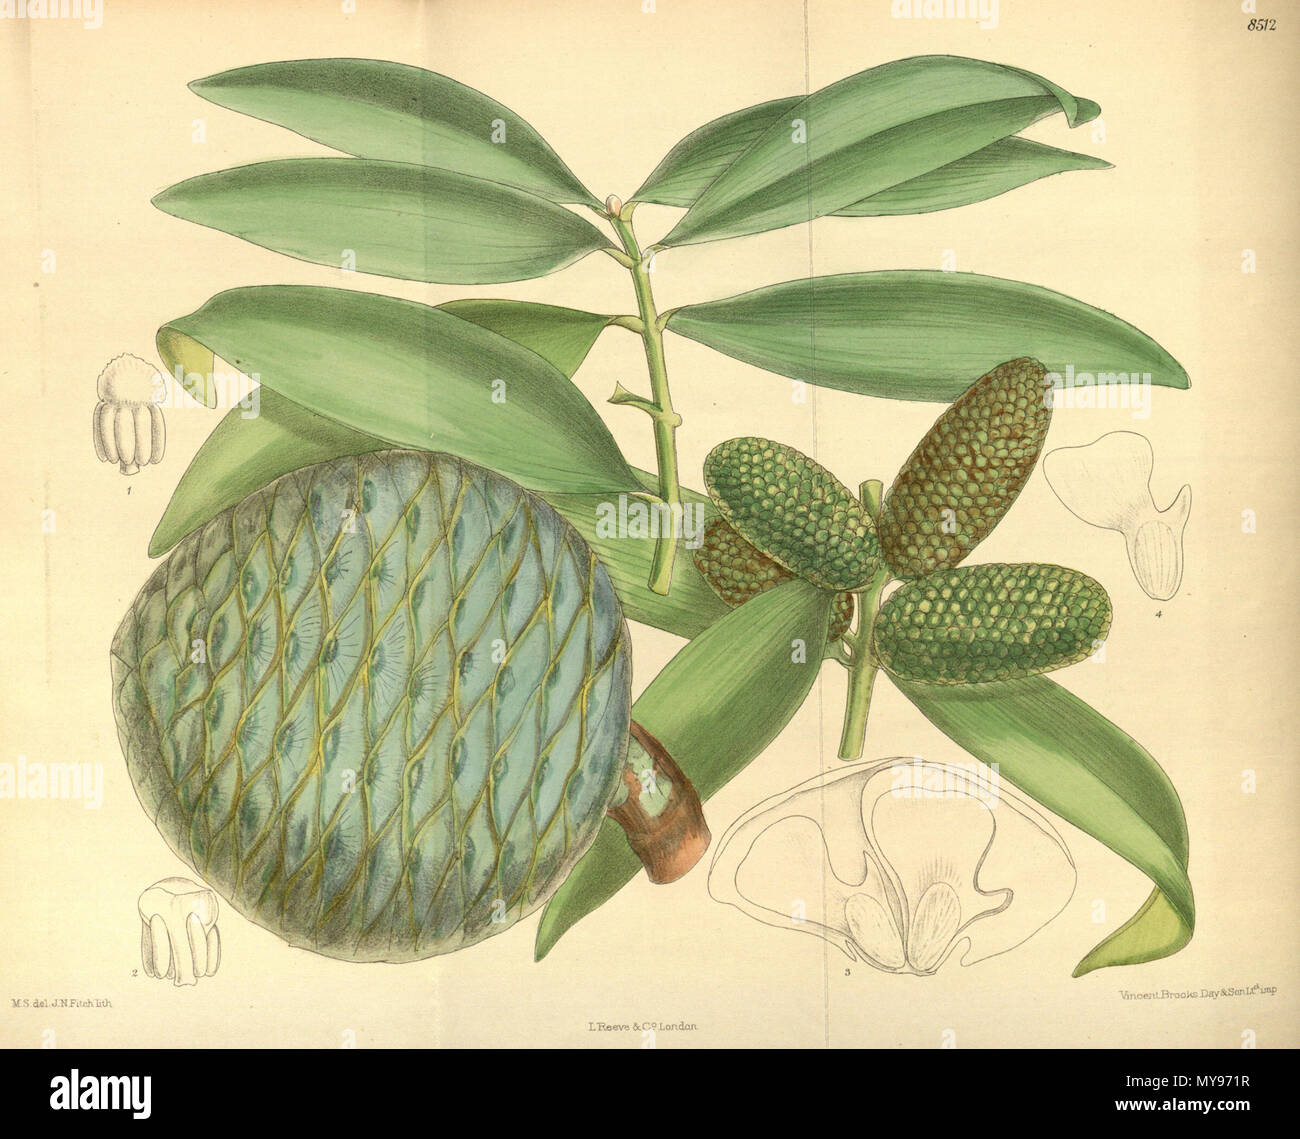 . Agathis vitiensis (= Agathis macrophylla), Araucariaceae . 1913. M.S. del, J.N.Fitch, lith. 25 Agathis vitiensis 139-8512 Stock Photo